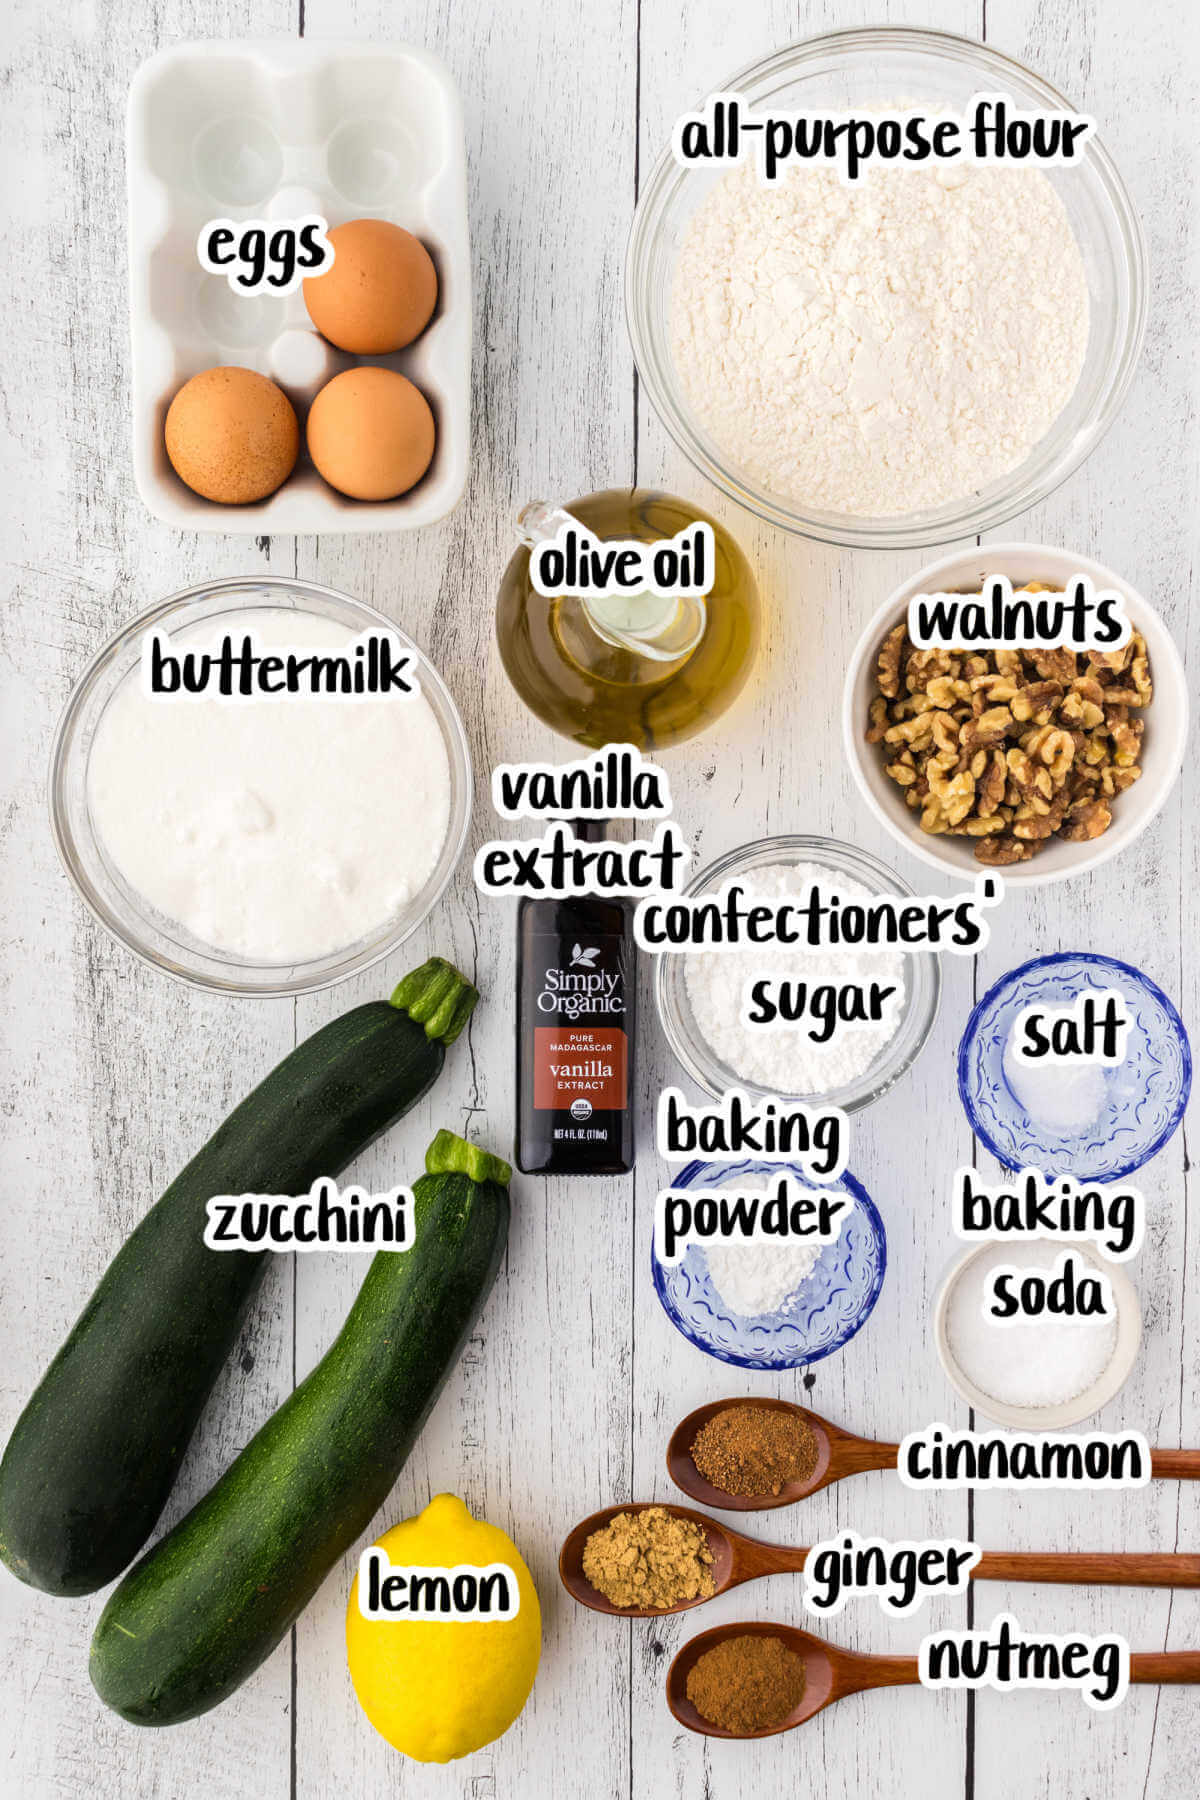 Image of the ingredients needed to make the Lemon Zucchini Cake with Olive oil. 